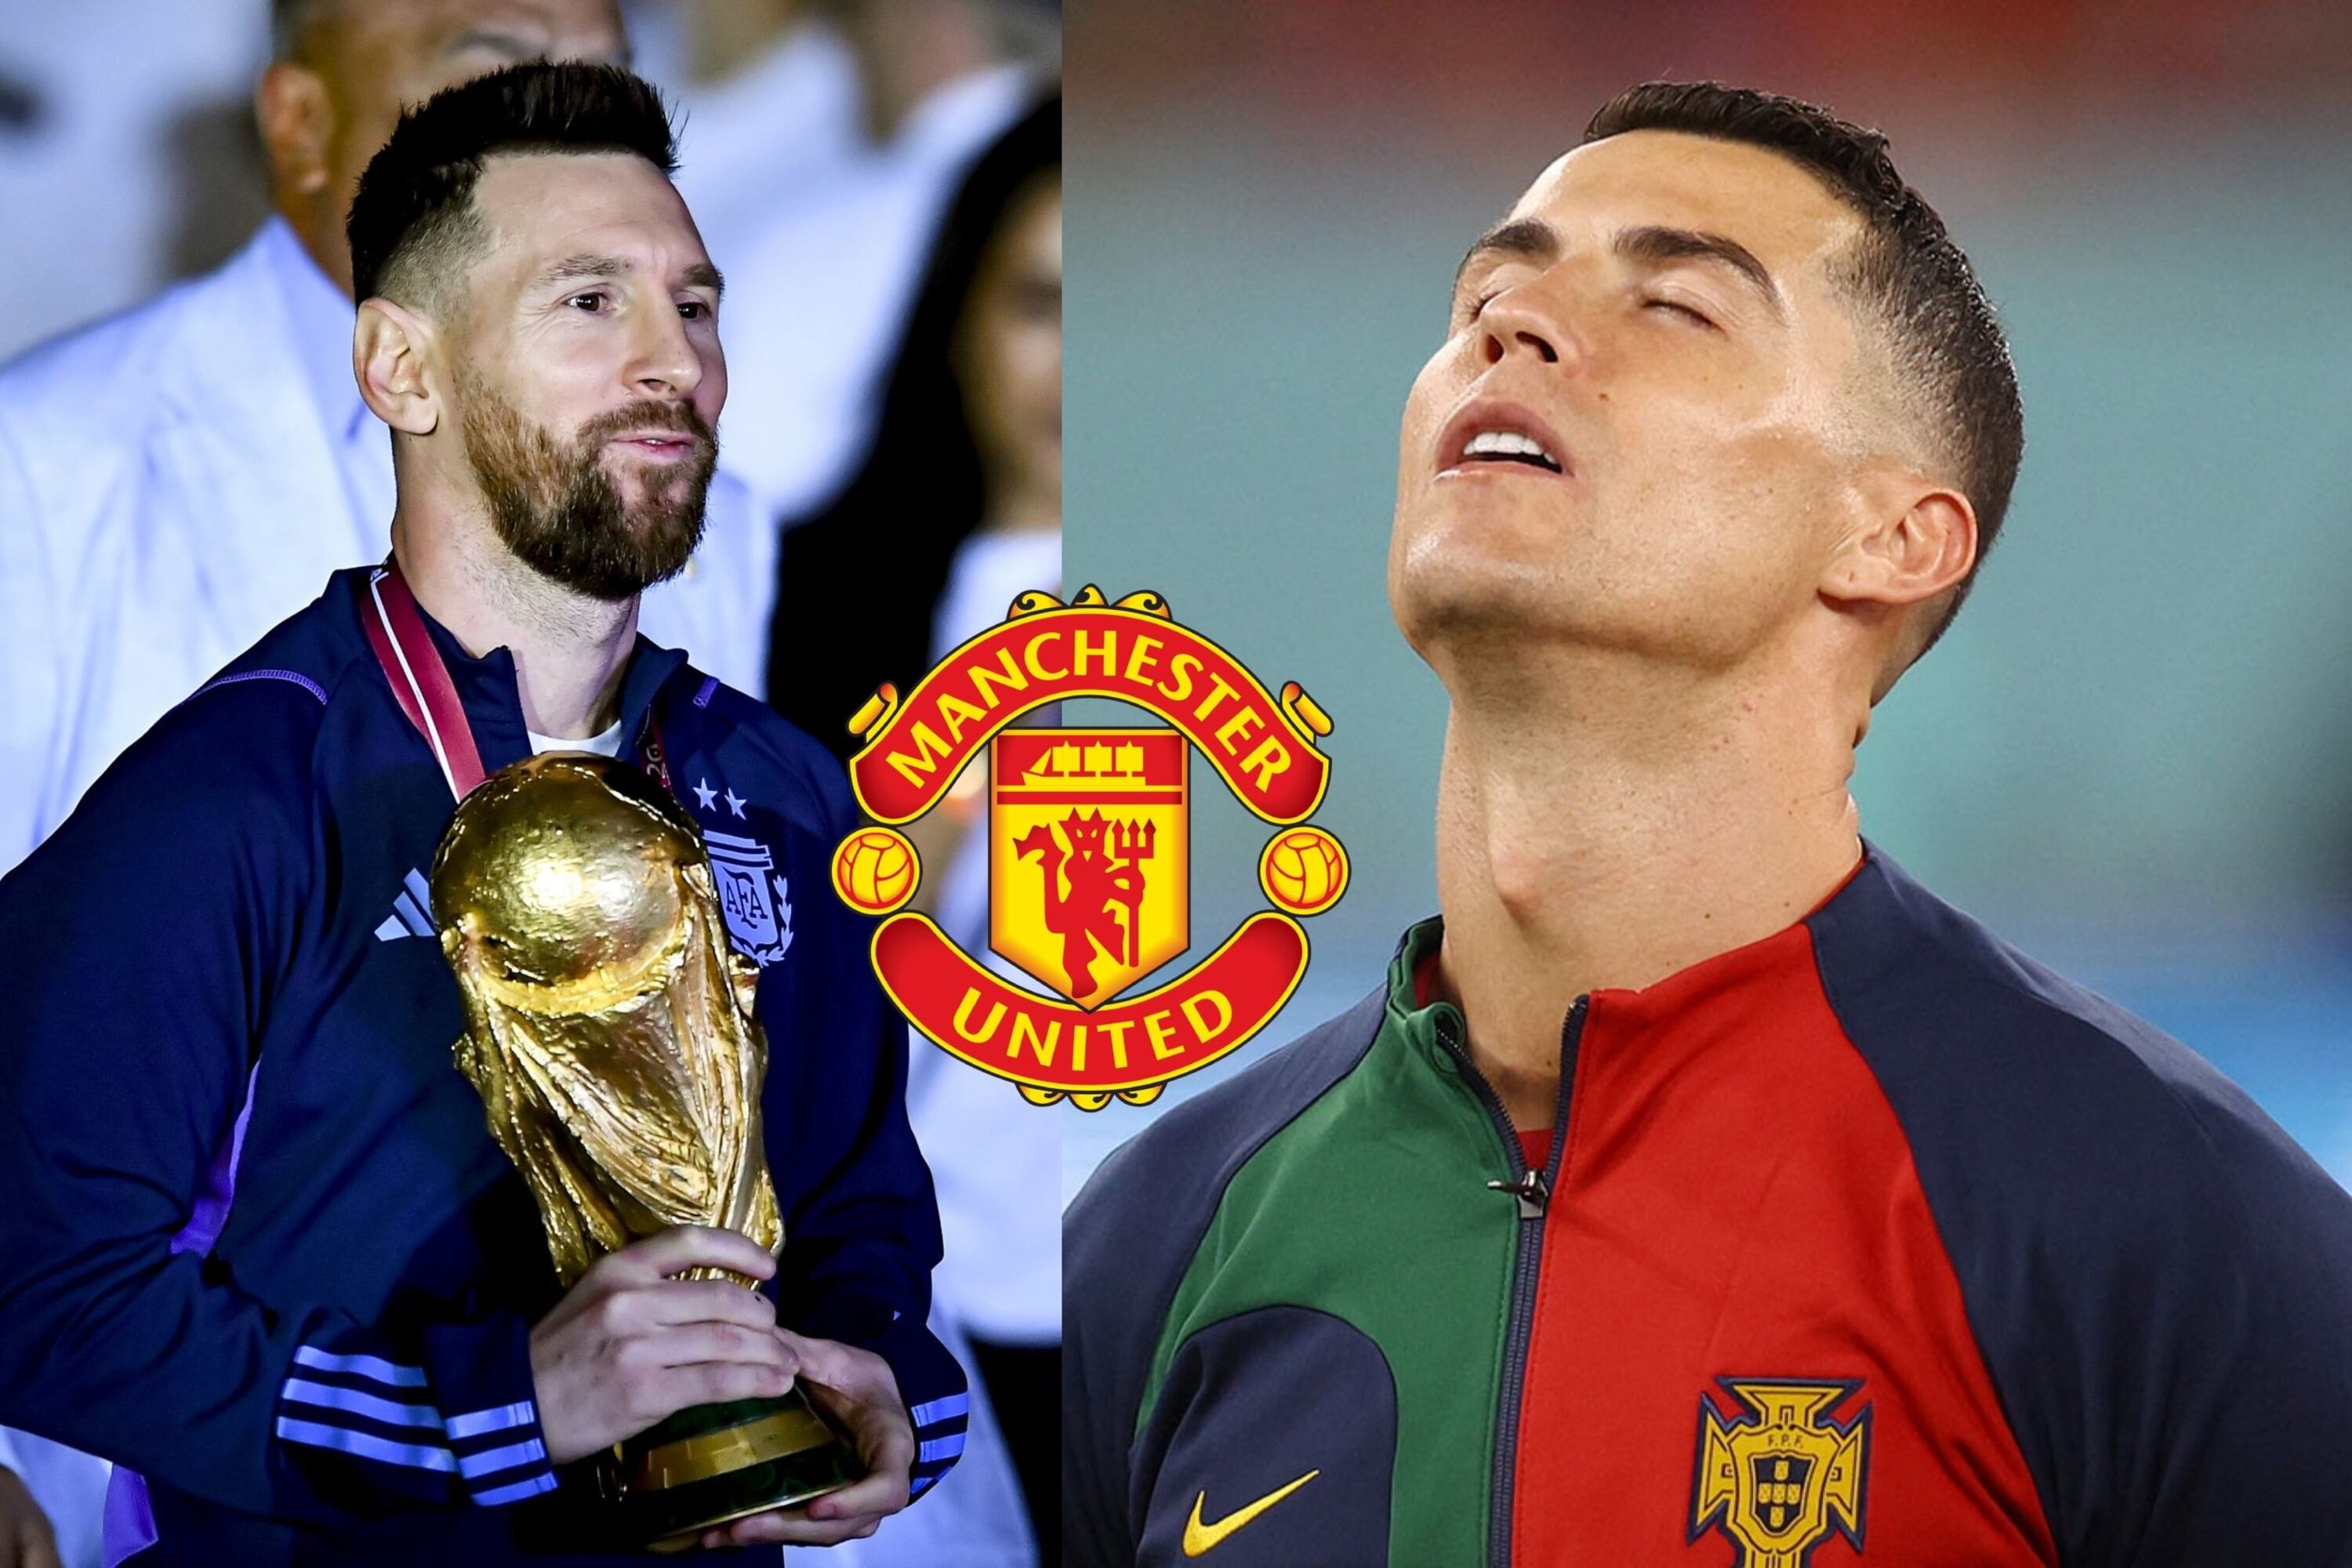 While Messi continues to celebrate, Man United players' reaction to seeing Ronaldo without a club